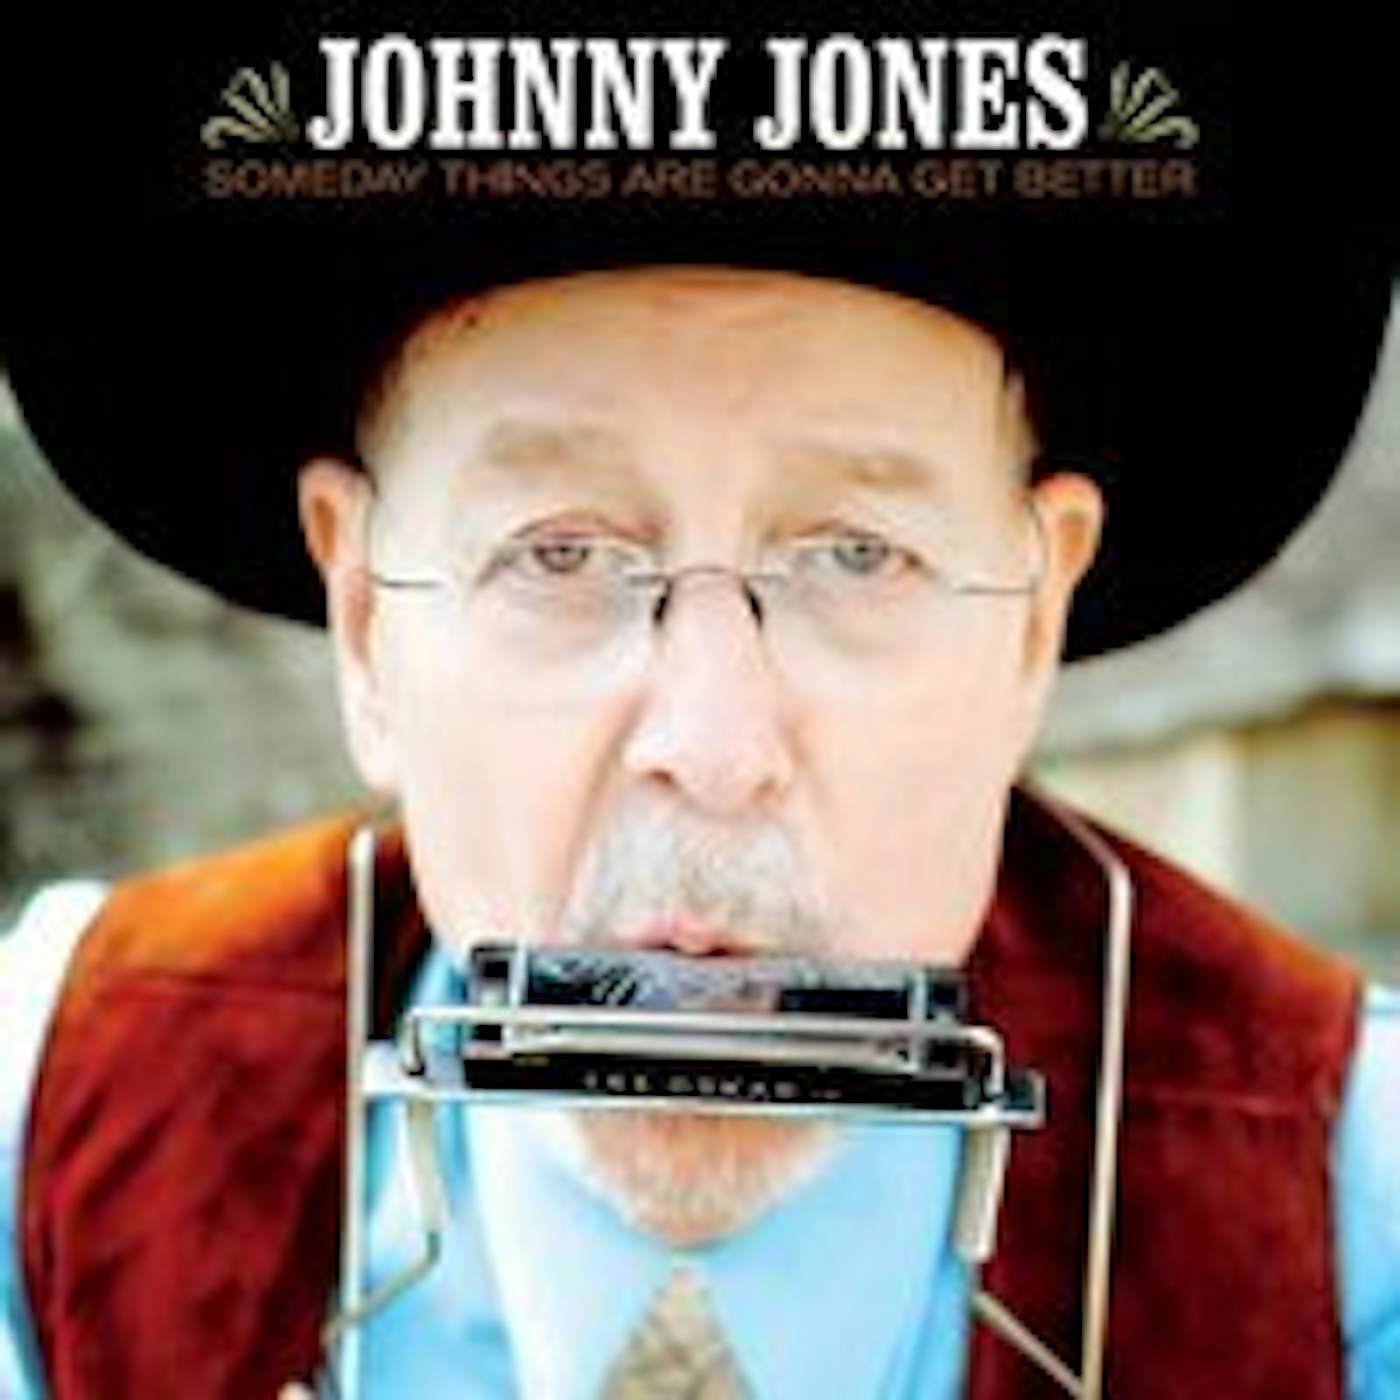 Johnny Jones SOMEDAY THINGS ARE GONNA GET BETTER CD